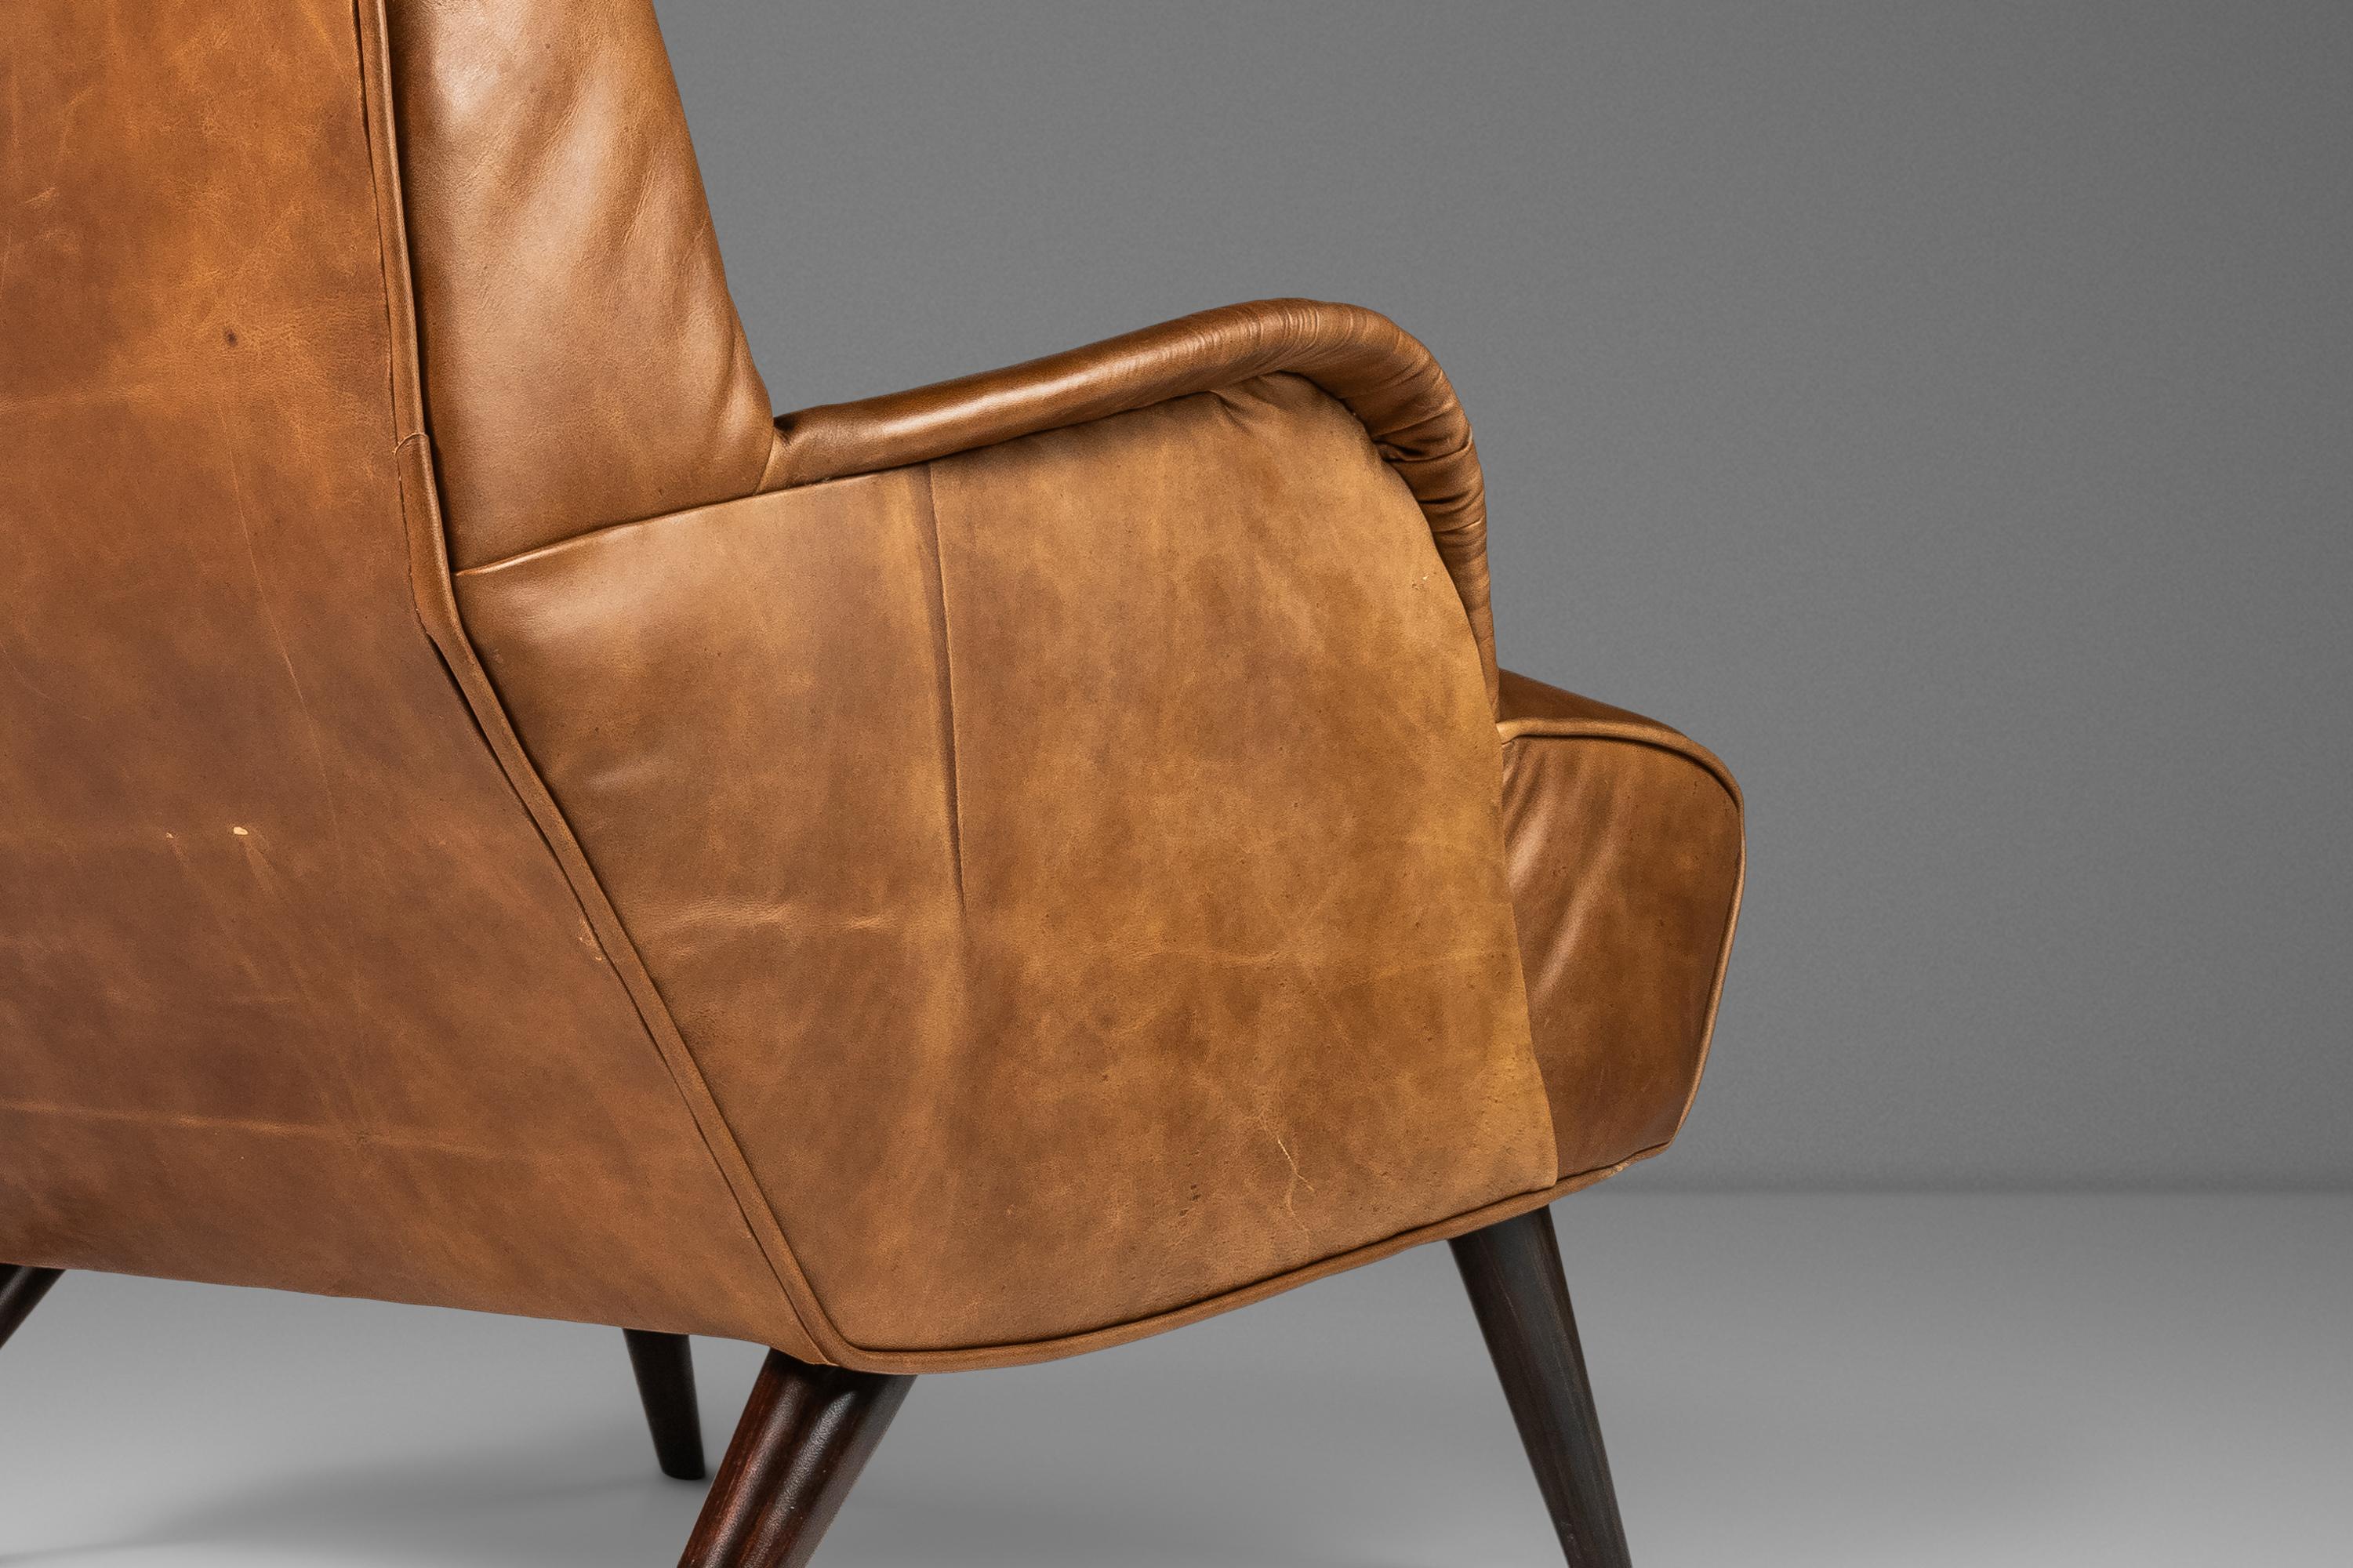 Low Profile Lounge Chair in Leather Attributed to Carlo de Carli, Italy, 1960's For Sale 4